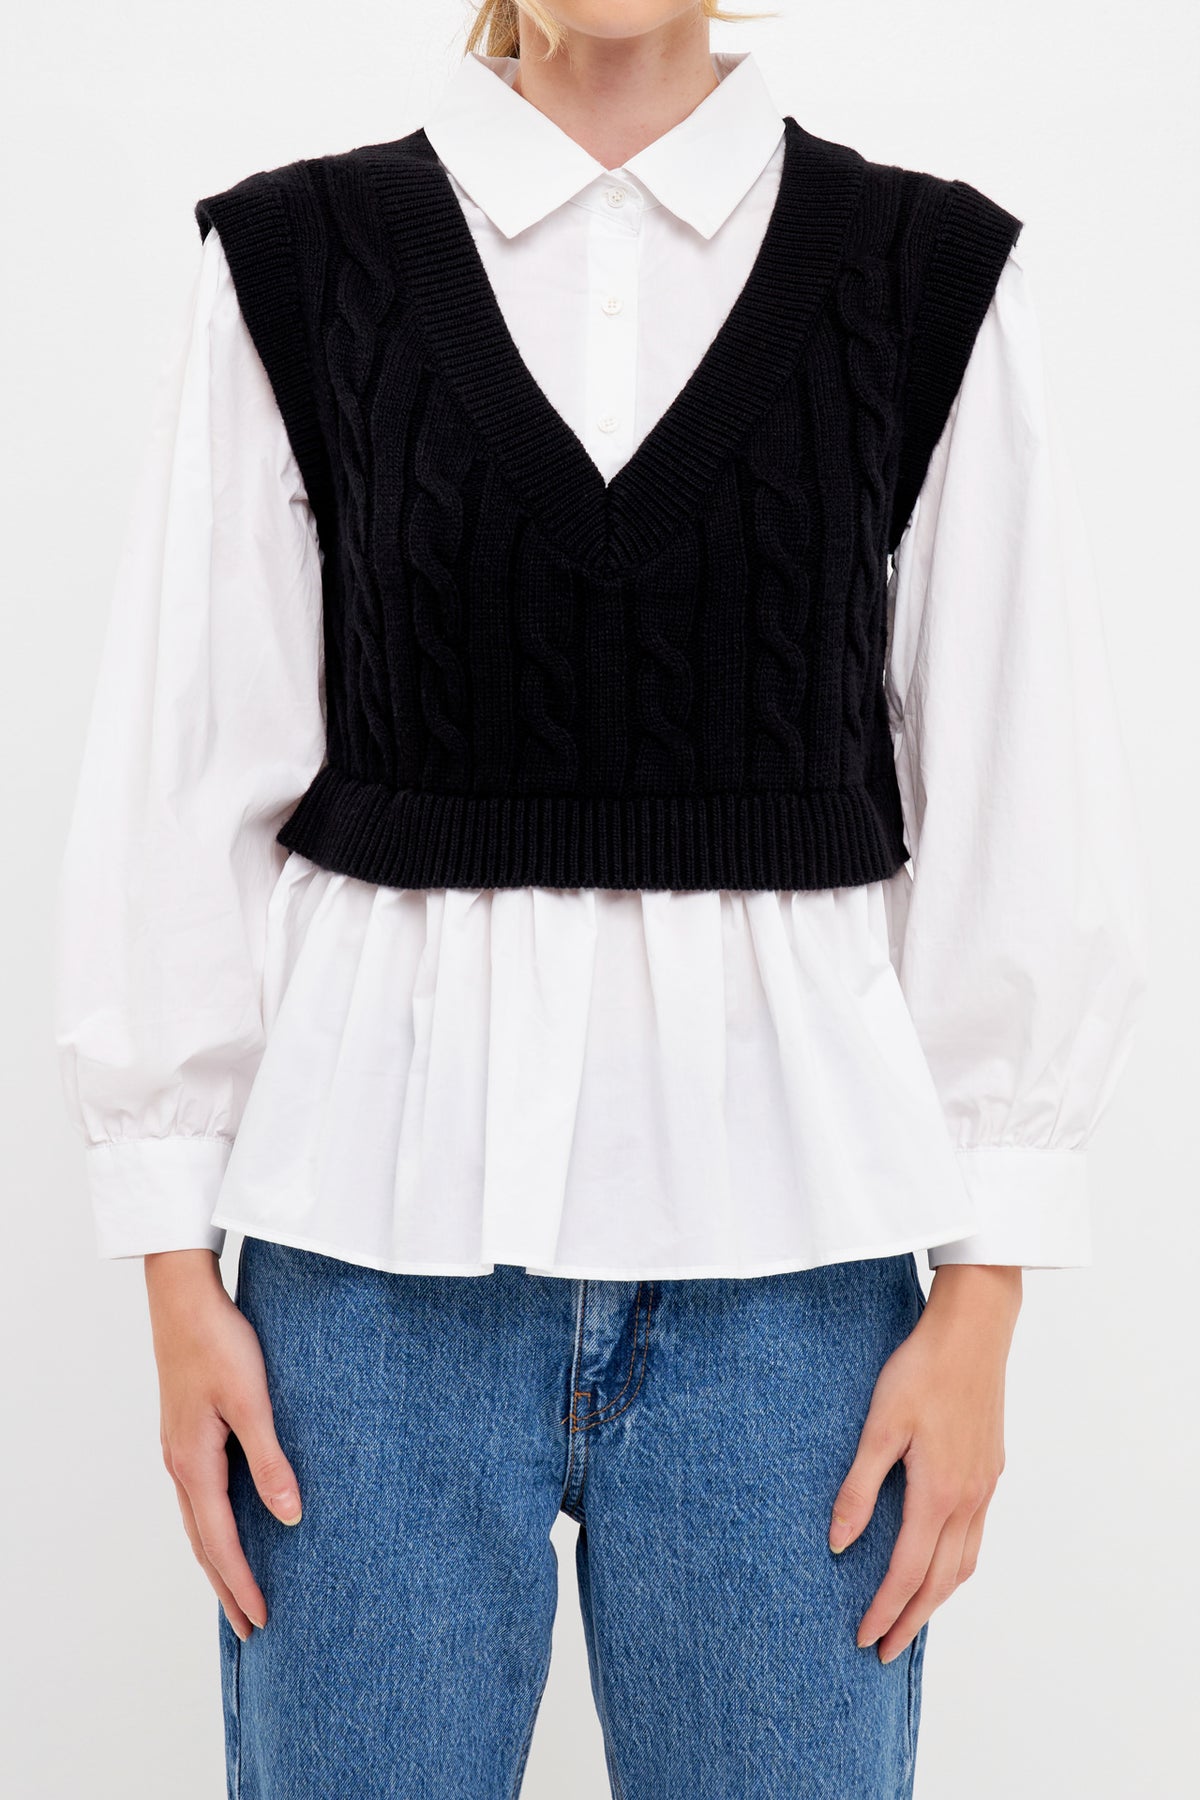 ENGLISH FACTORY - Mixed Media Sweater Vest Top - SWEATERS & KNITS available at Objectrare